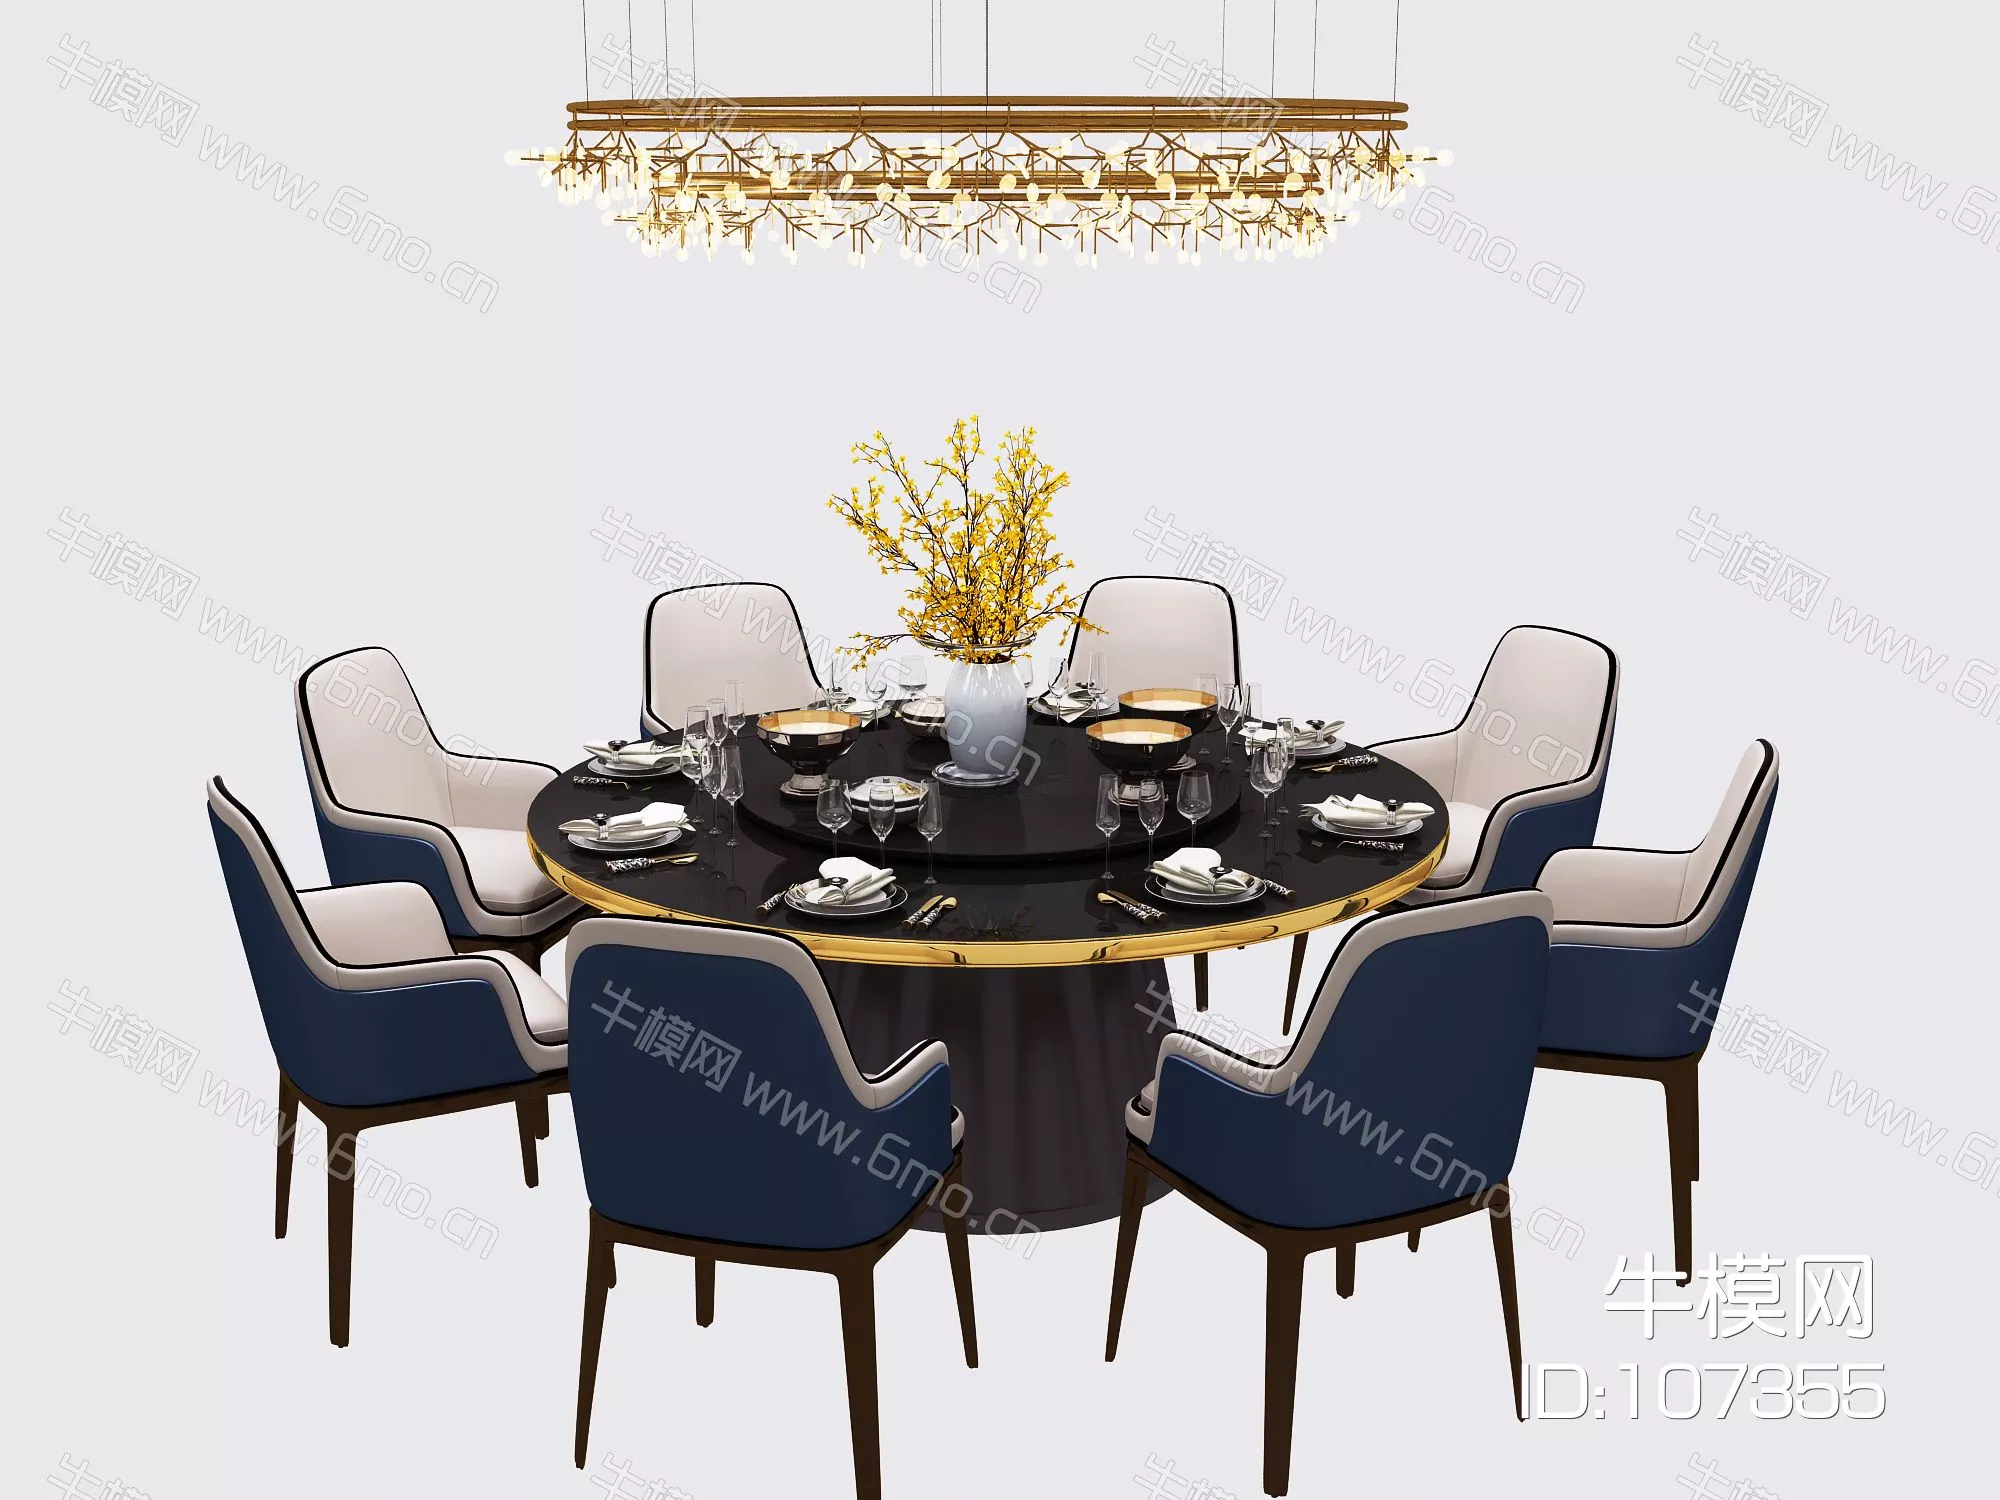 CHINESE DINING TABLE SET - SKETCHUP 3D MODEL - VRAY - 107355